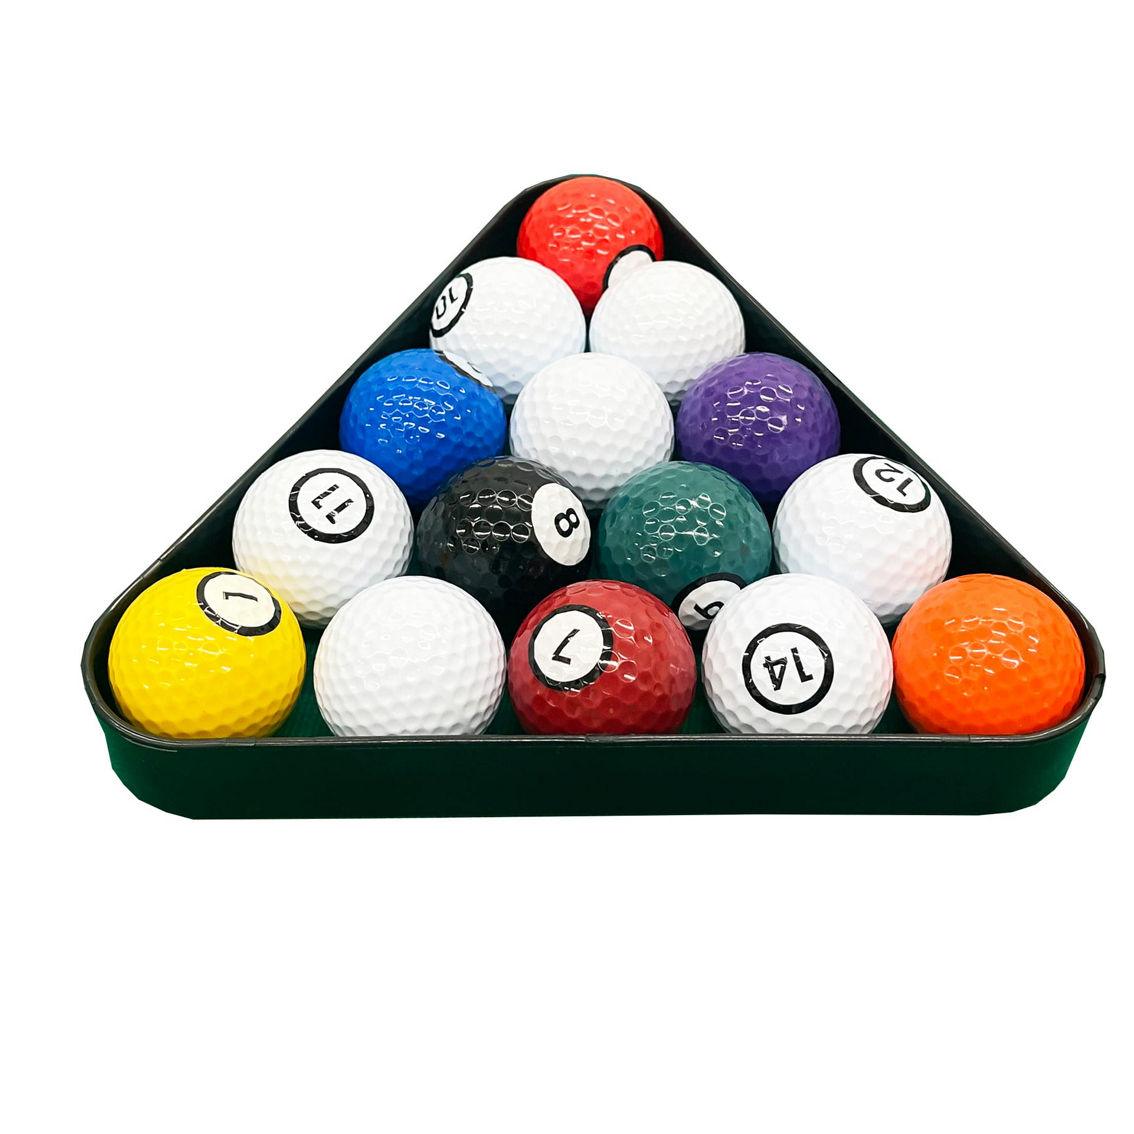 GOLF GIFTS & GALLERY POOL TABLE PUTTING GAME - Image 4 of 5